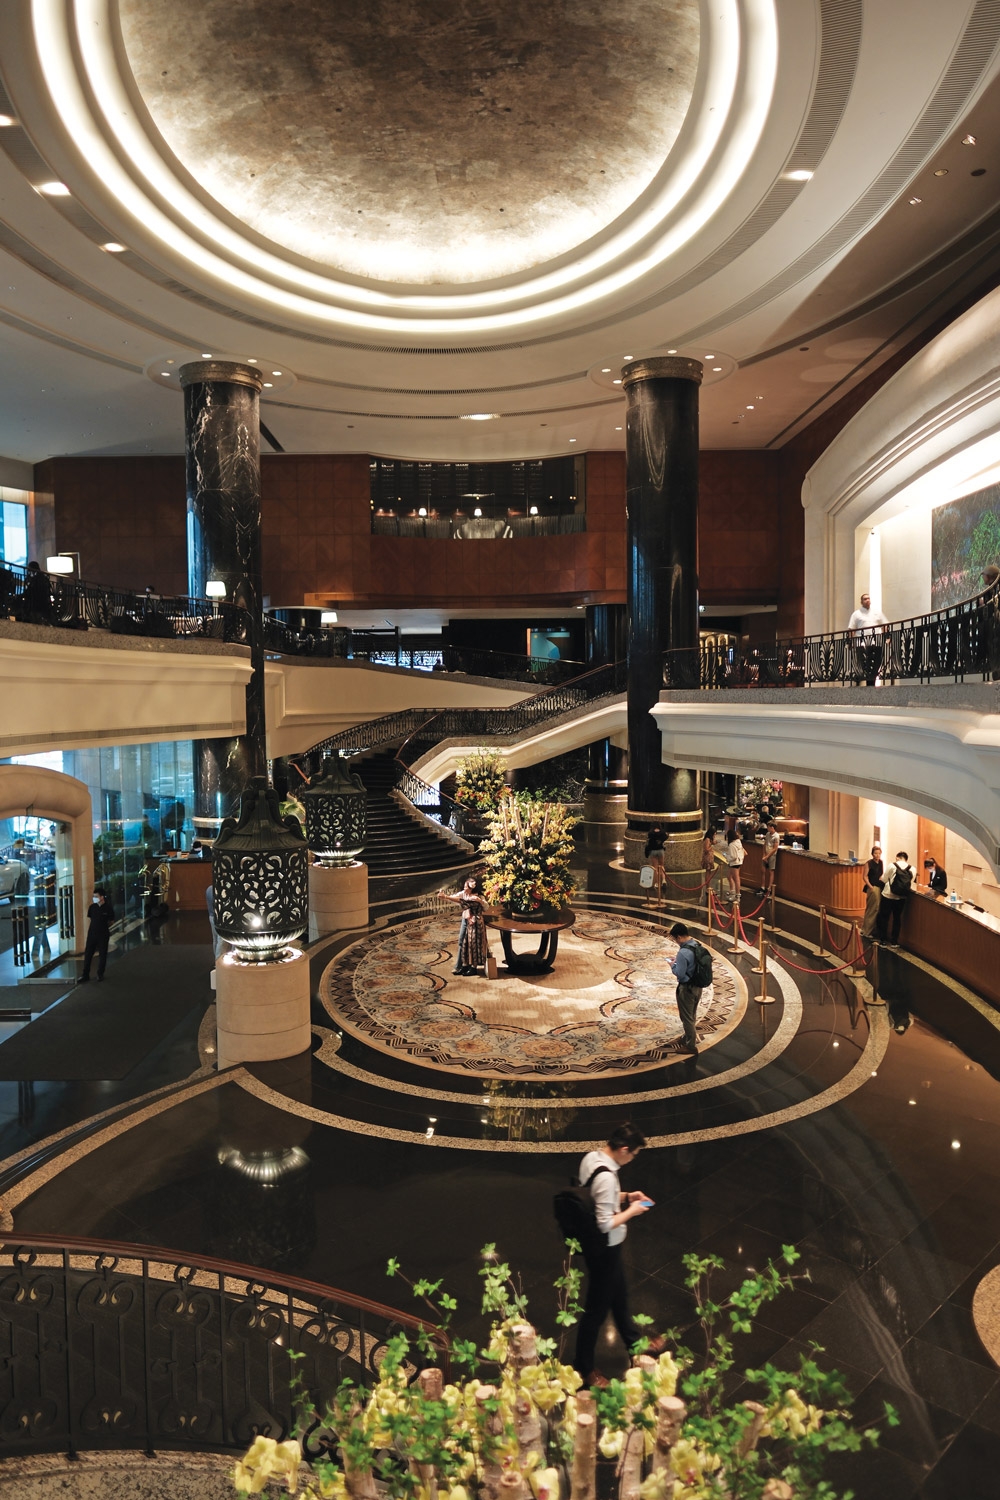 The Grand Hyatt boasts the largest and most grandiose lobby in the Harbour City Hotel.